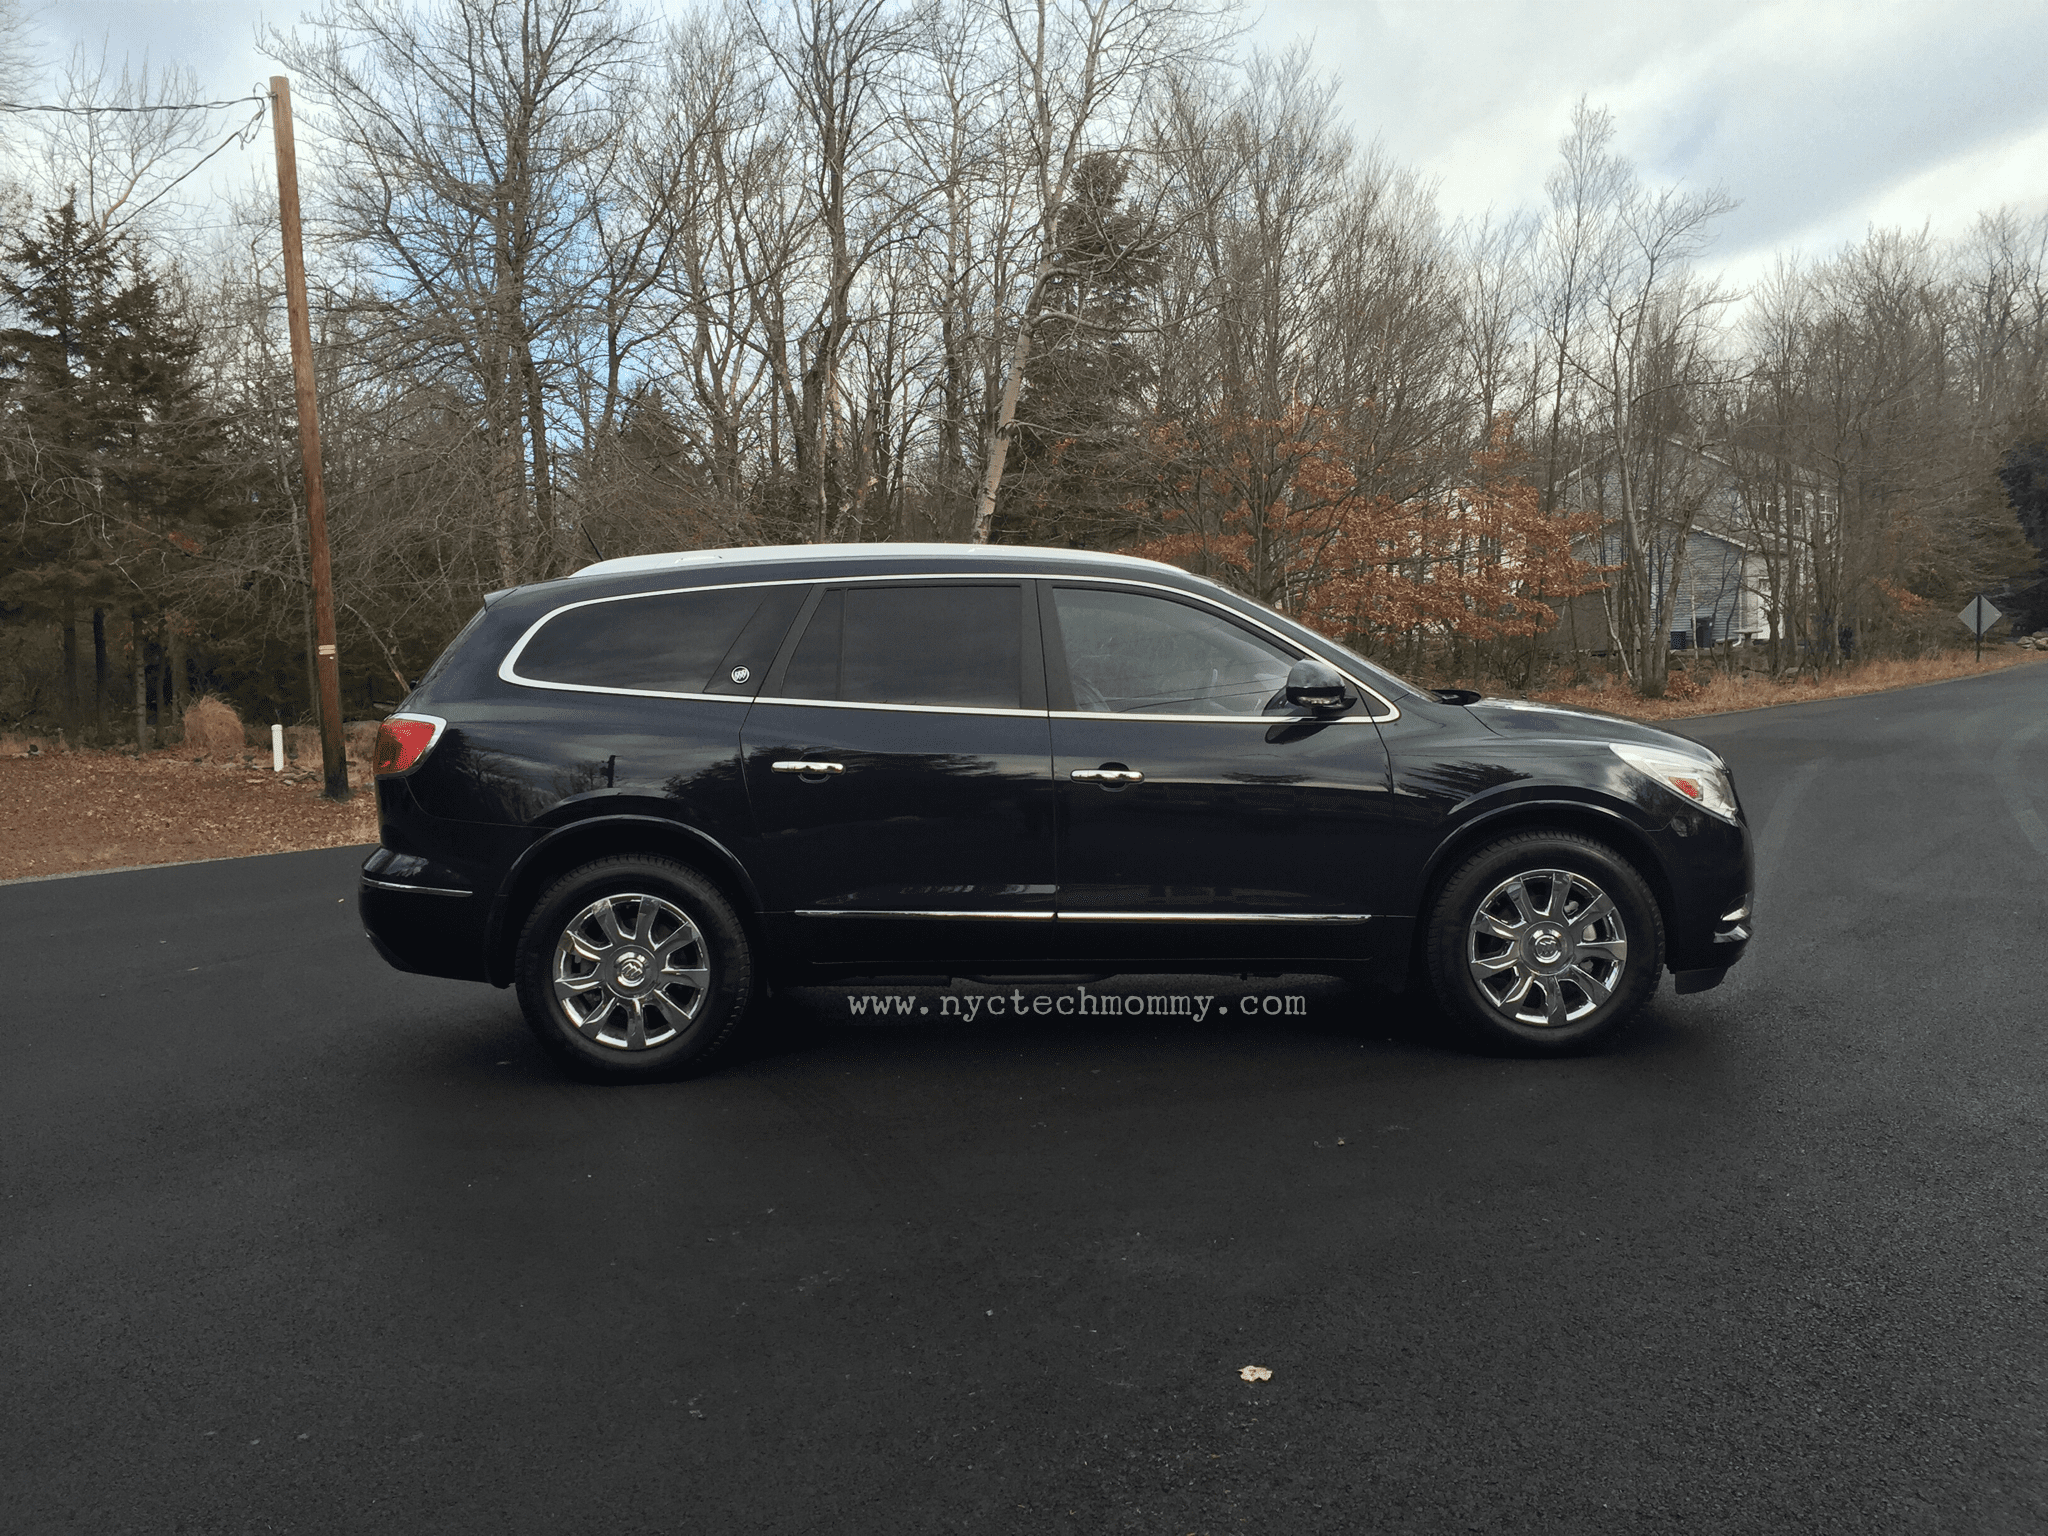 Test Driving the 2016 Buick Enclave - The perfect crossover SUV for a family road trip. The 2016 Buick Enclave makes a great mid-size SUV crossover option for families who want a lot of space and a wealth of luxurious options without paying big luxury price tags. 